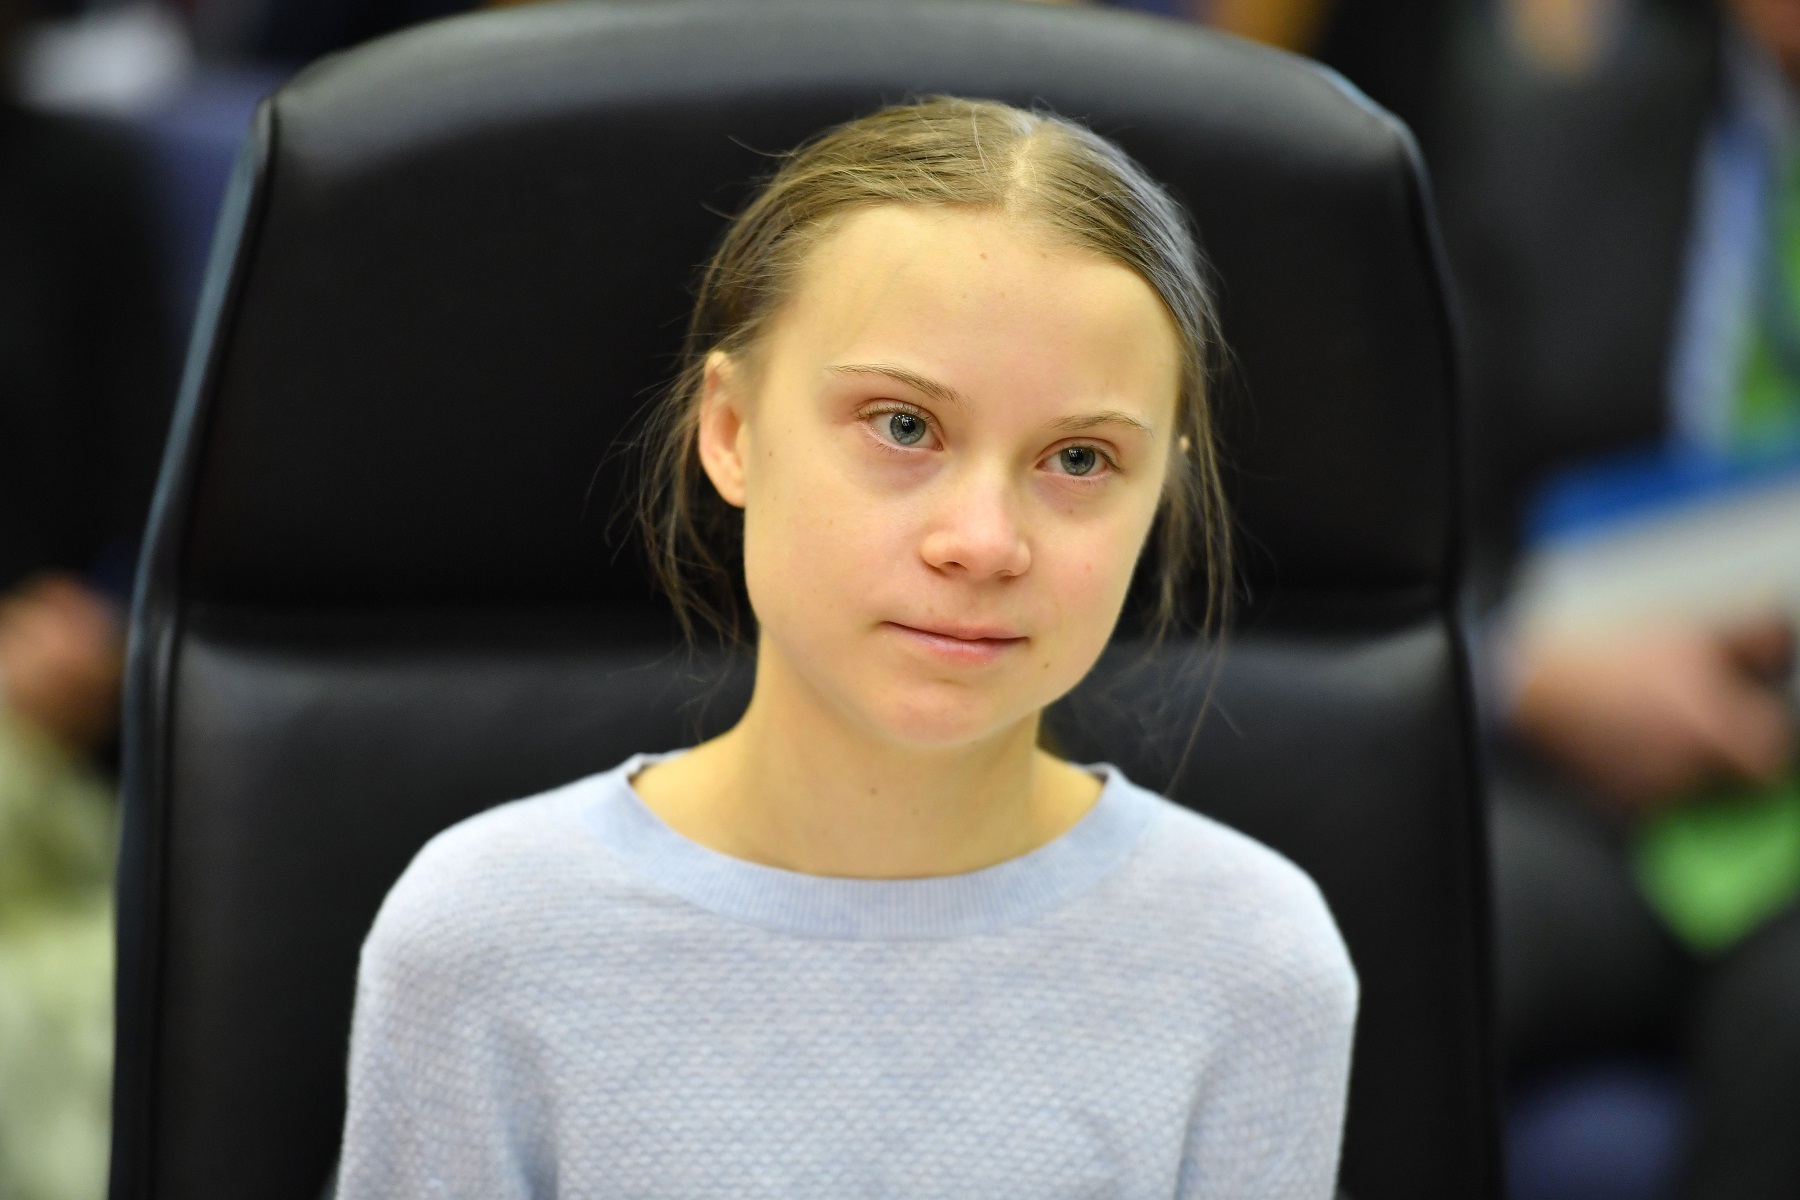 BRUSSELS, BELGIUM - MARCH 04: Swedish environmentalist Greta Thunberg attends a meeting at the invitation of President of the European Commission Ursula von der Leyen as they announce a new EU climate deal, at the European Commission on March 4, 2020 in Brussels, Belgium. (Photo by Leon Neal/Getty Images)